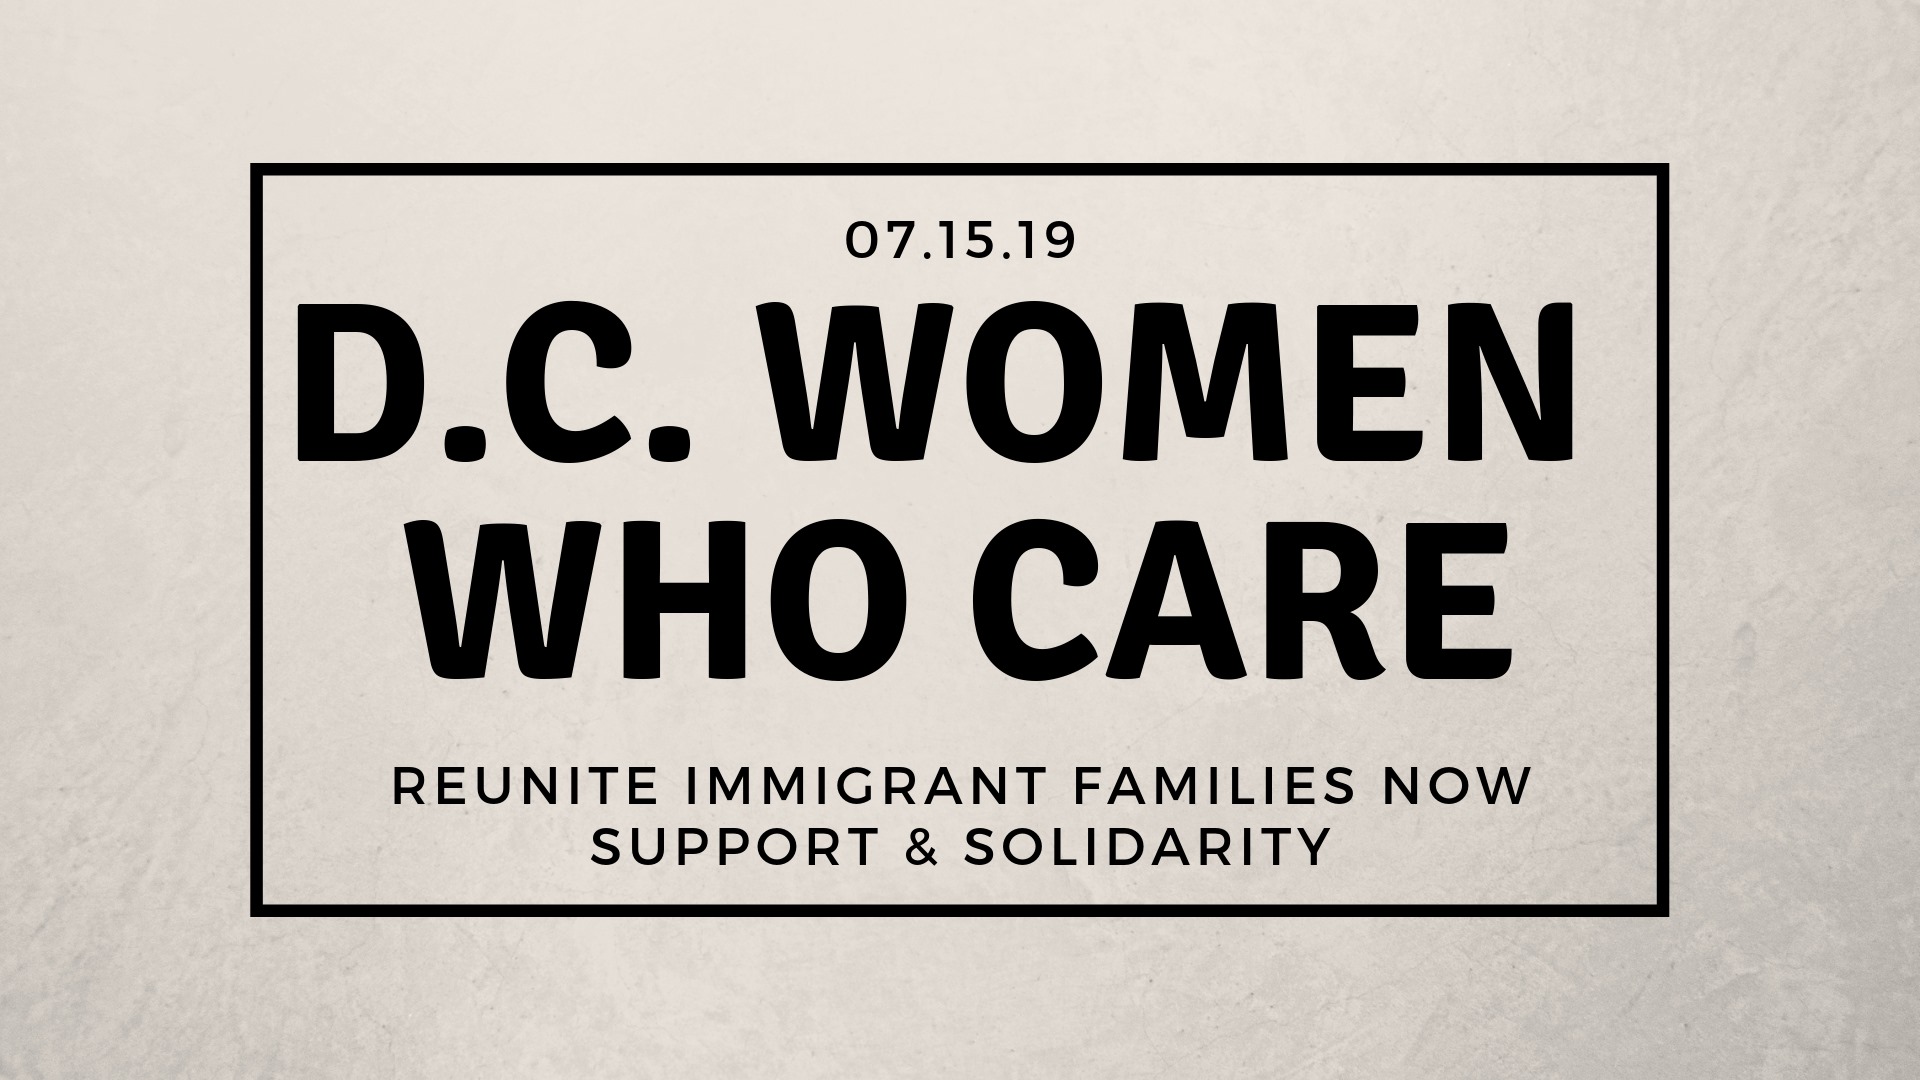 DC Women who care fundraiser